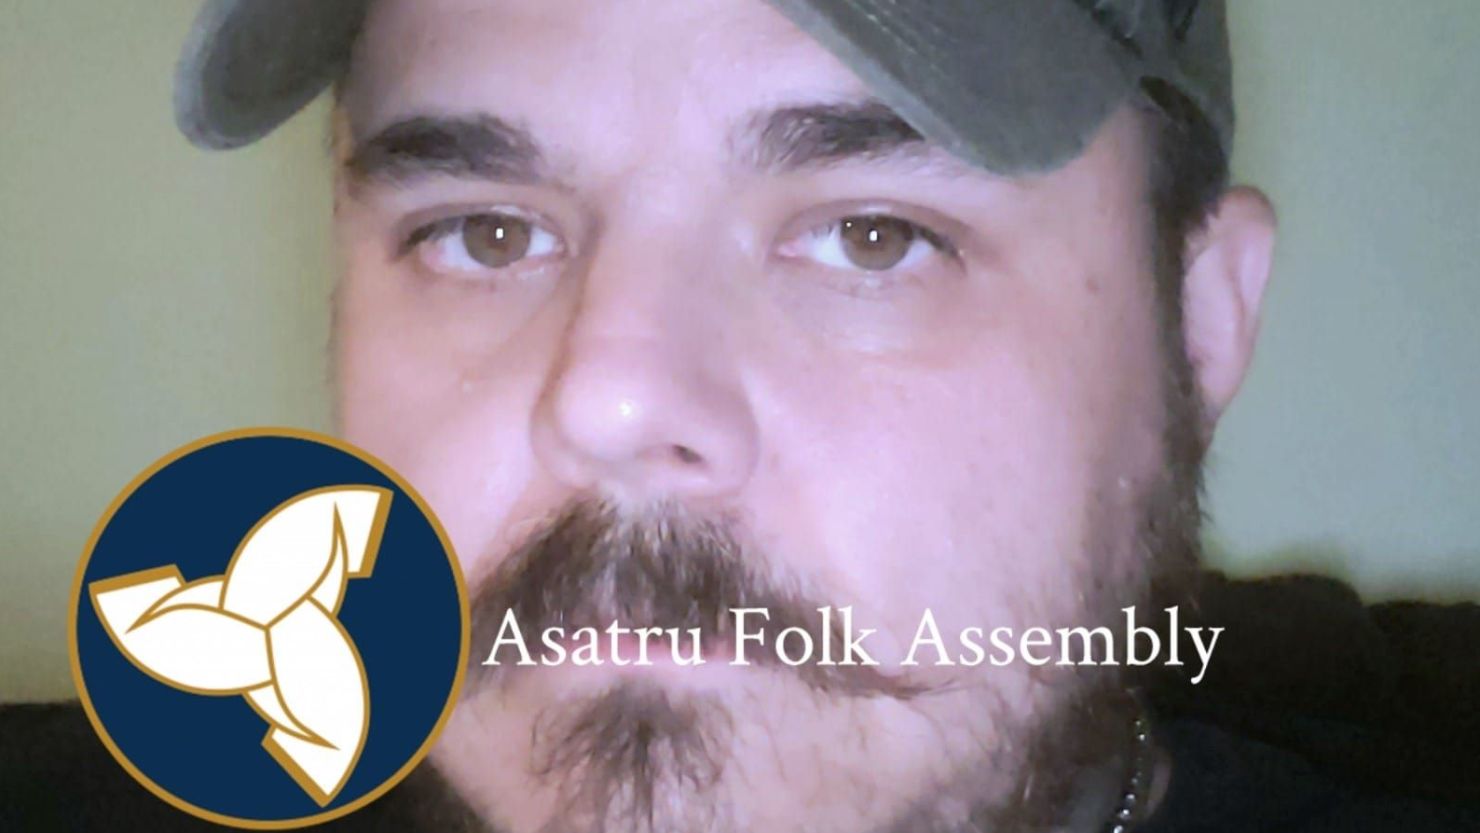 On his Facebook profile photo, Stamm has a stamp of the Asatru Folk Assembly, an organization the Southern Poverty Law Center classifies as a hate group. 